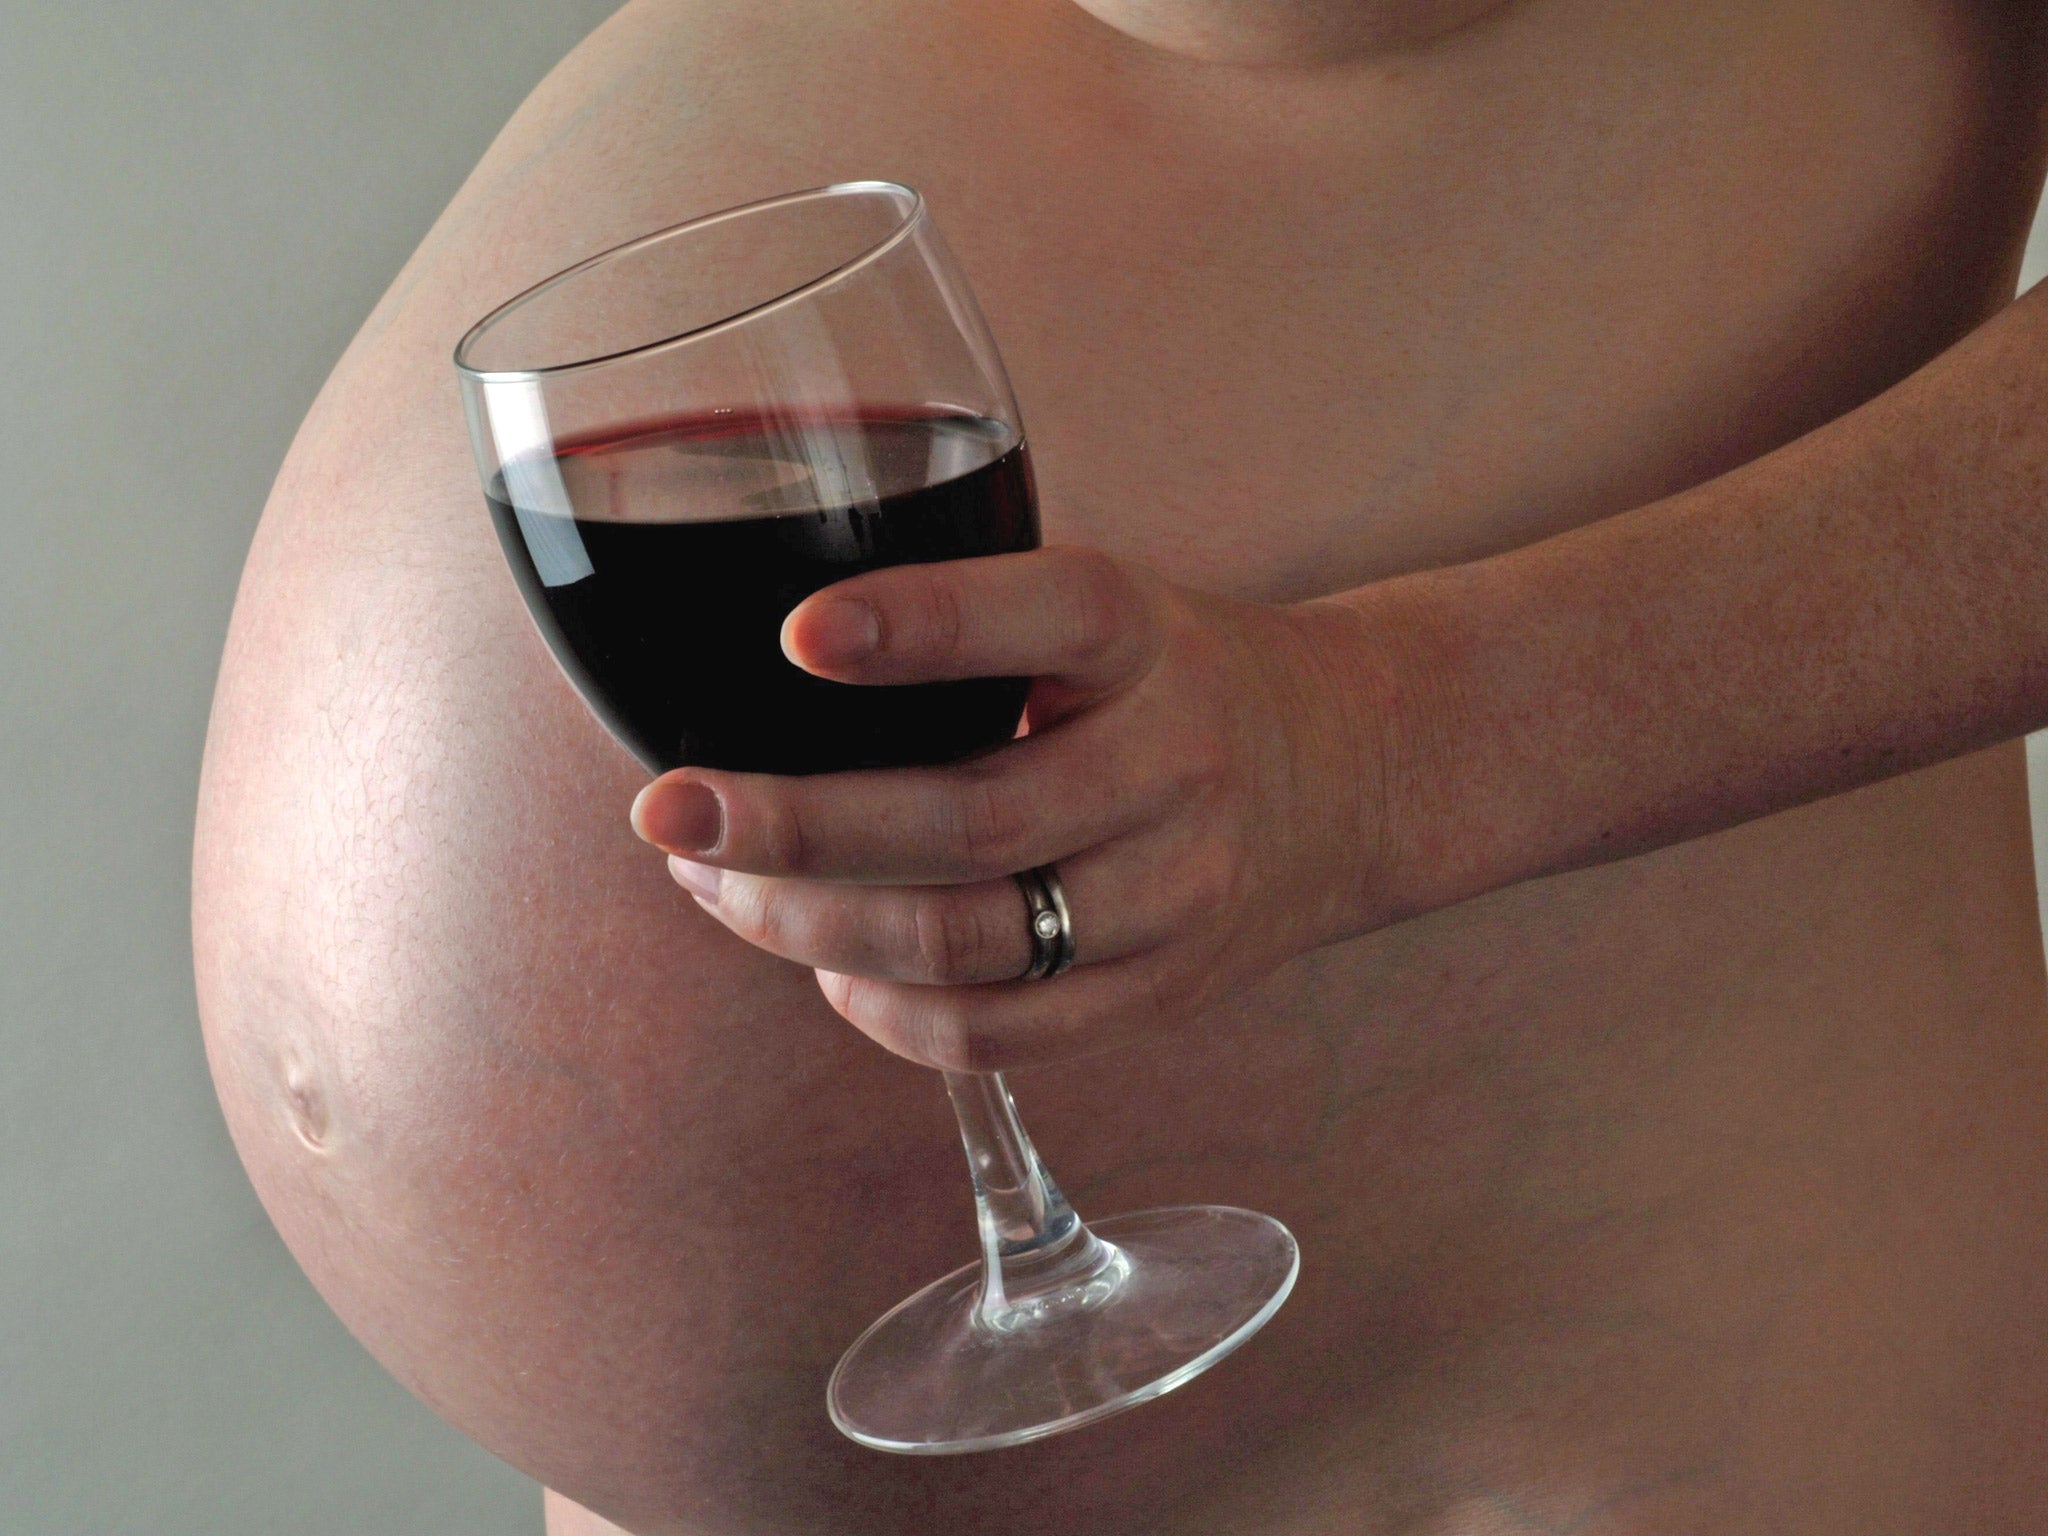 Alcohol passes easily from a mother’s bloodstream to her baby via the placenta